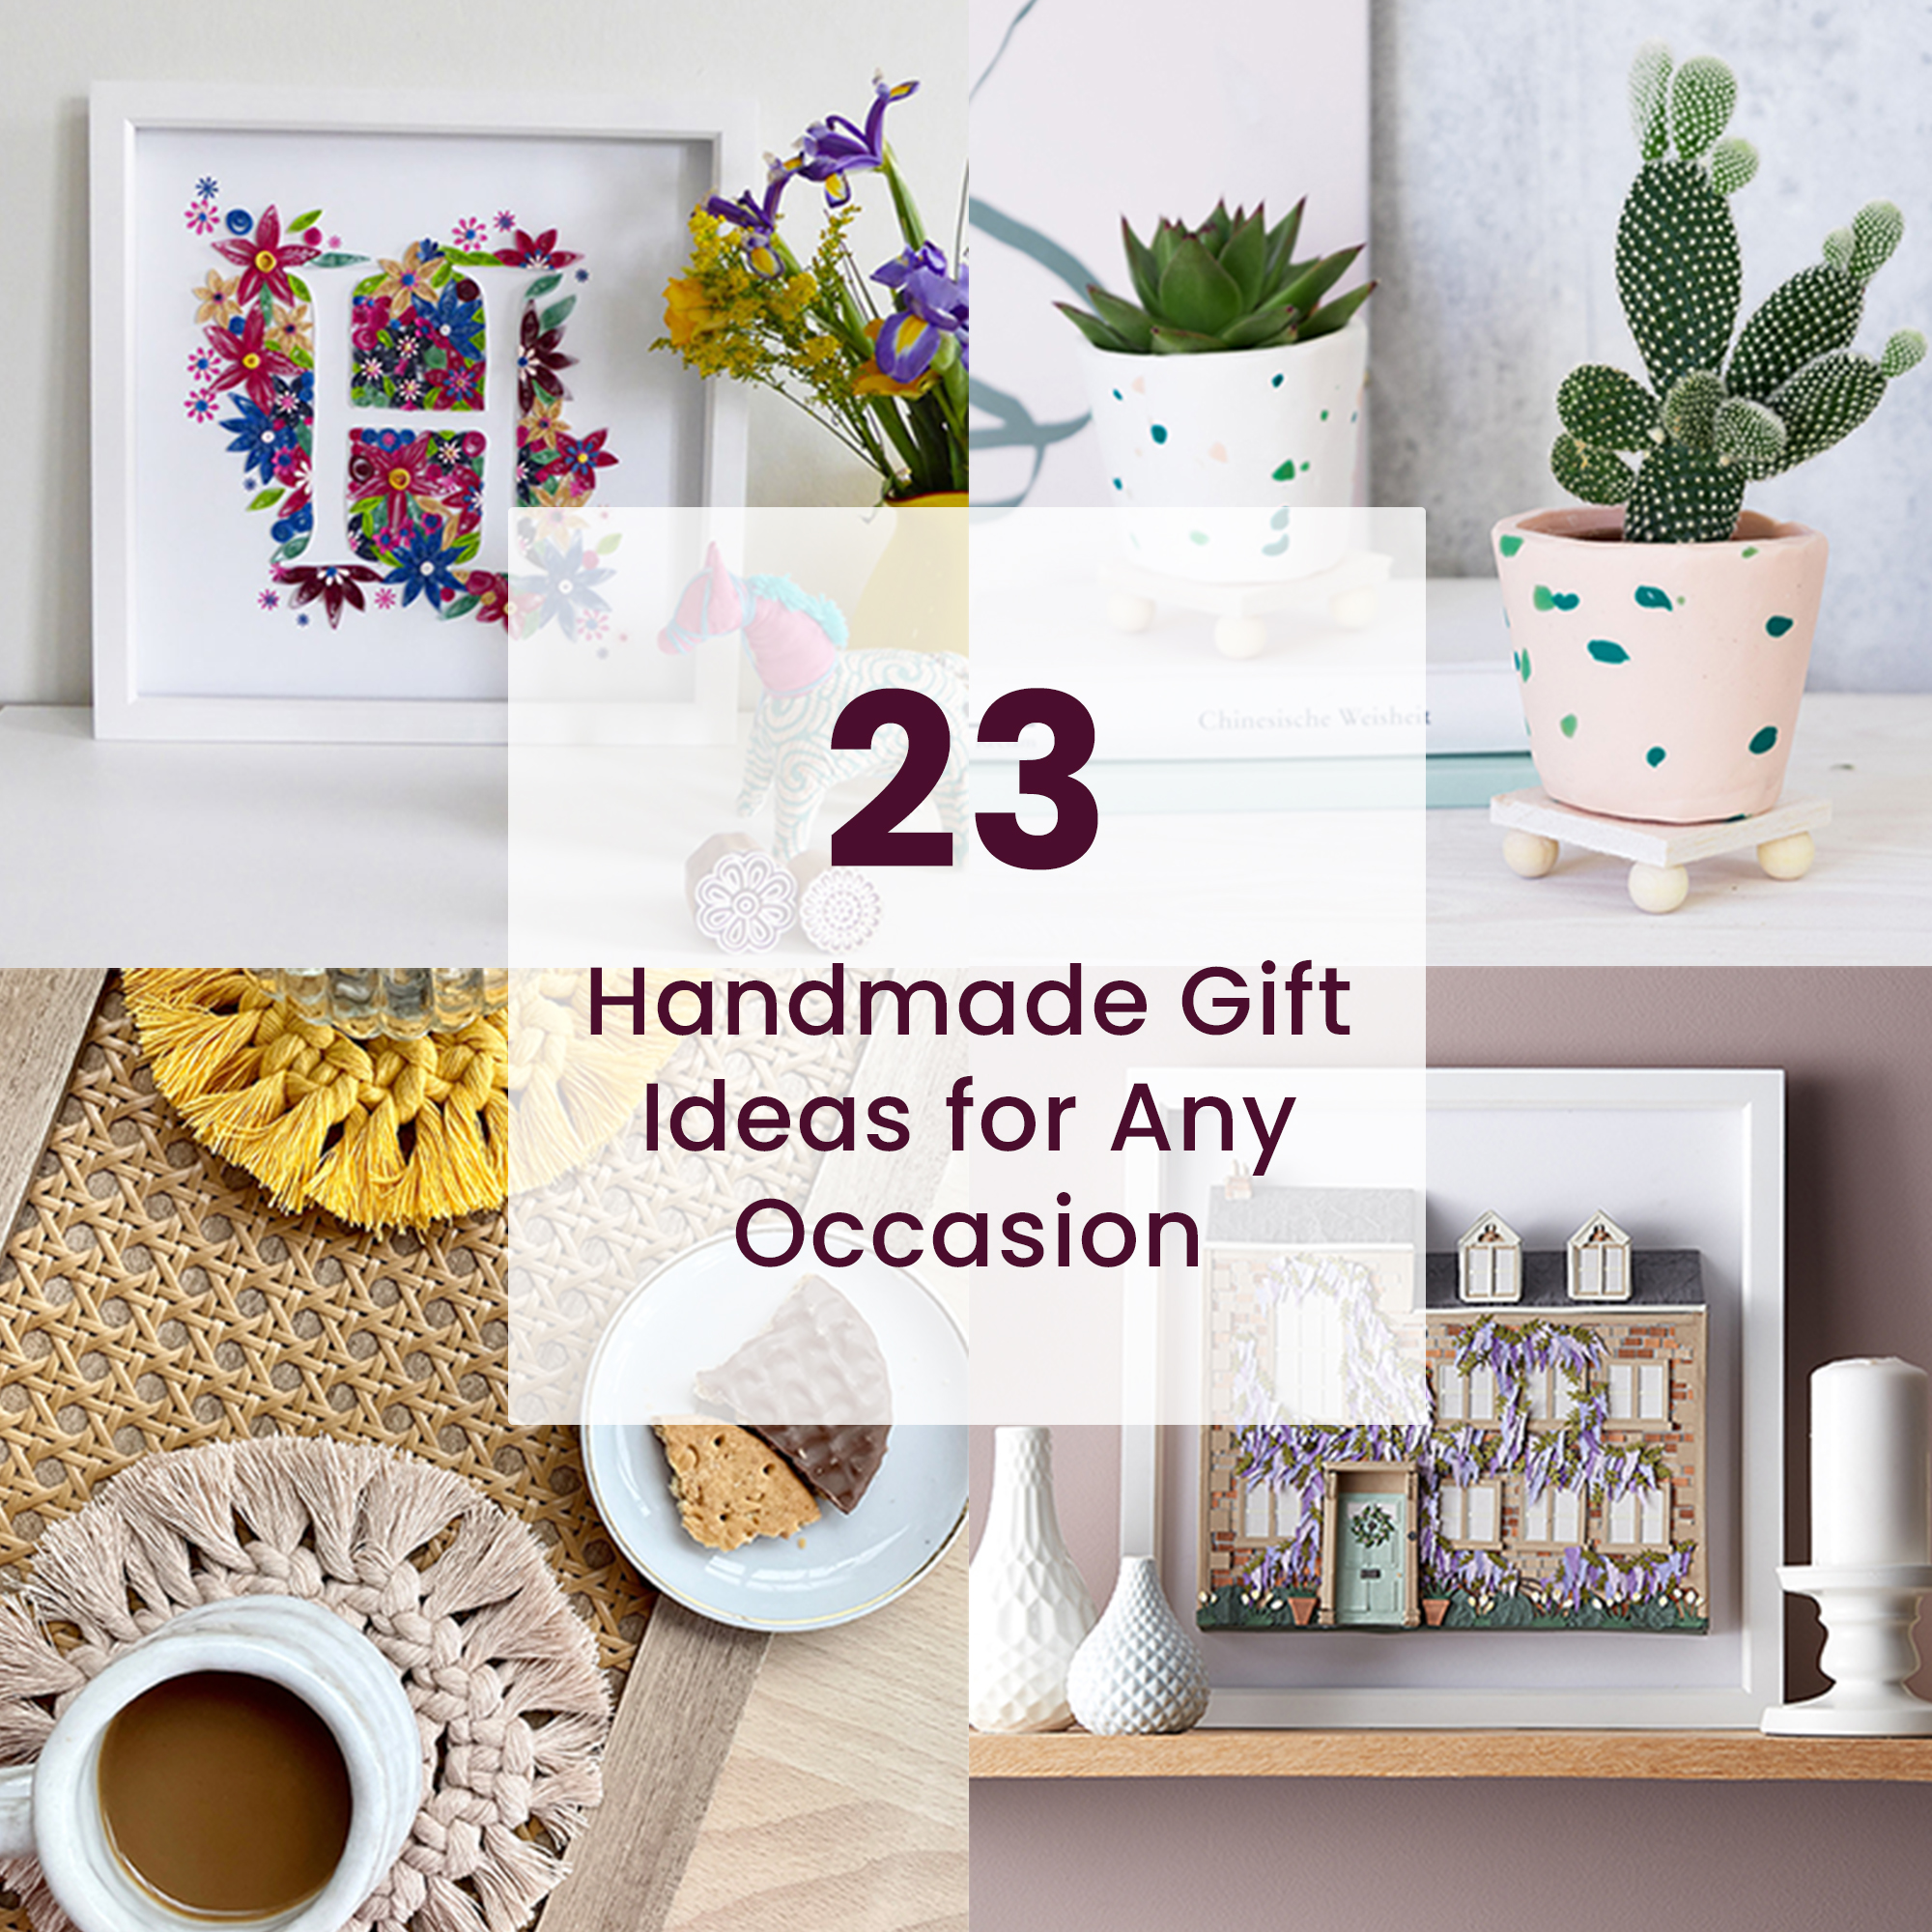 20+ Handmade Gift Ideas for Teens - The Birch Cottage